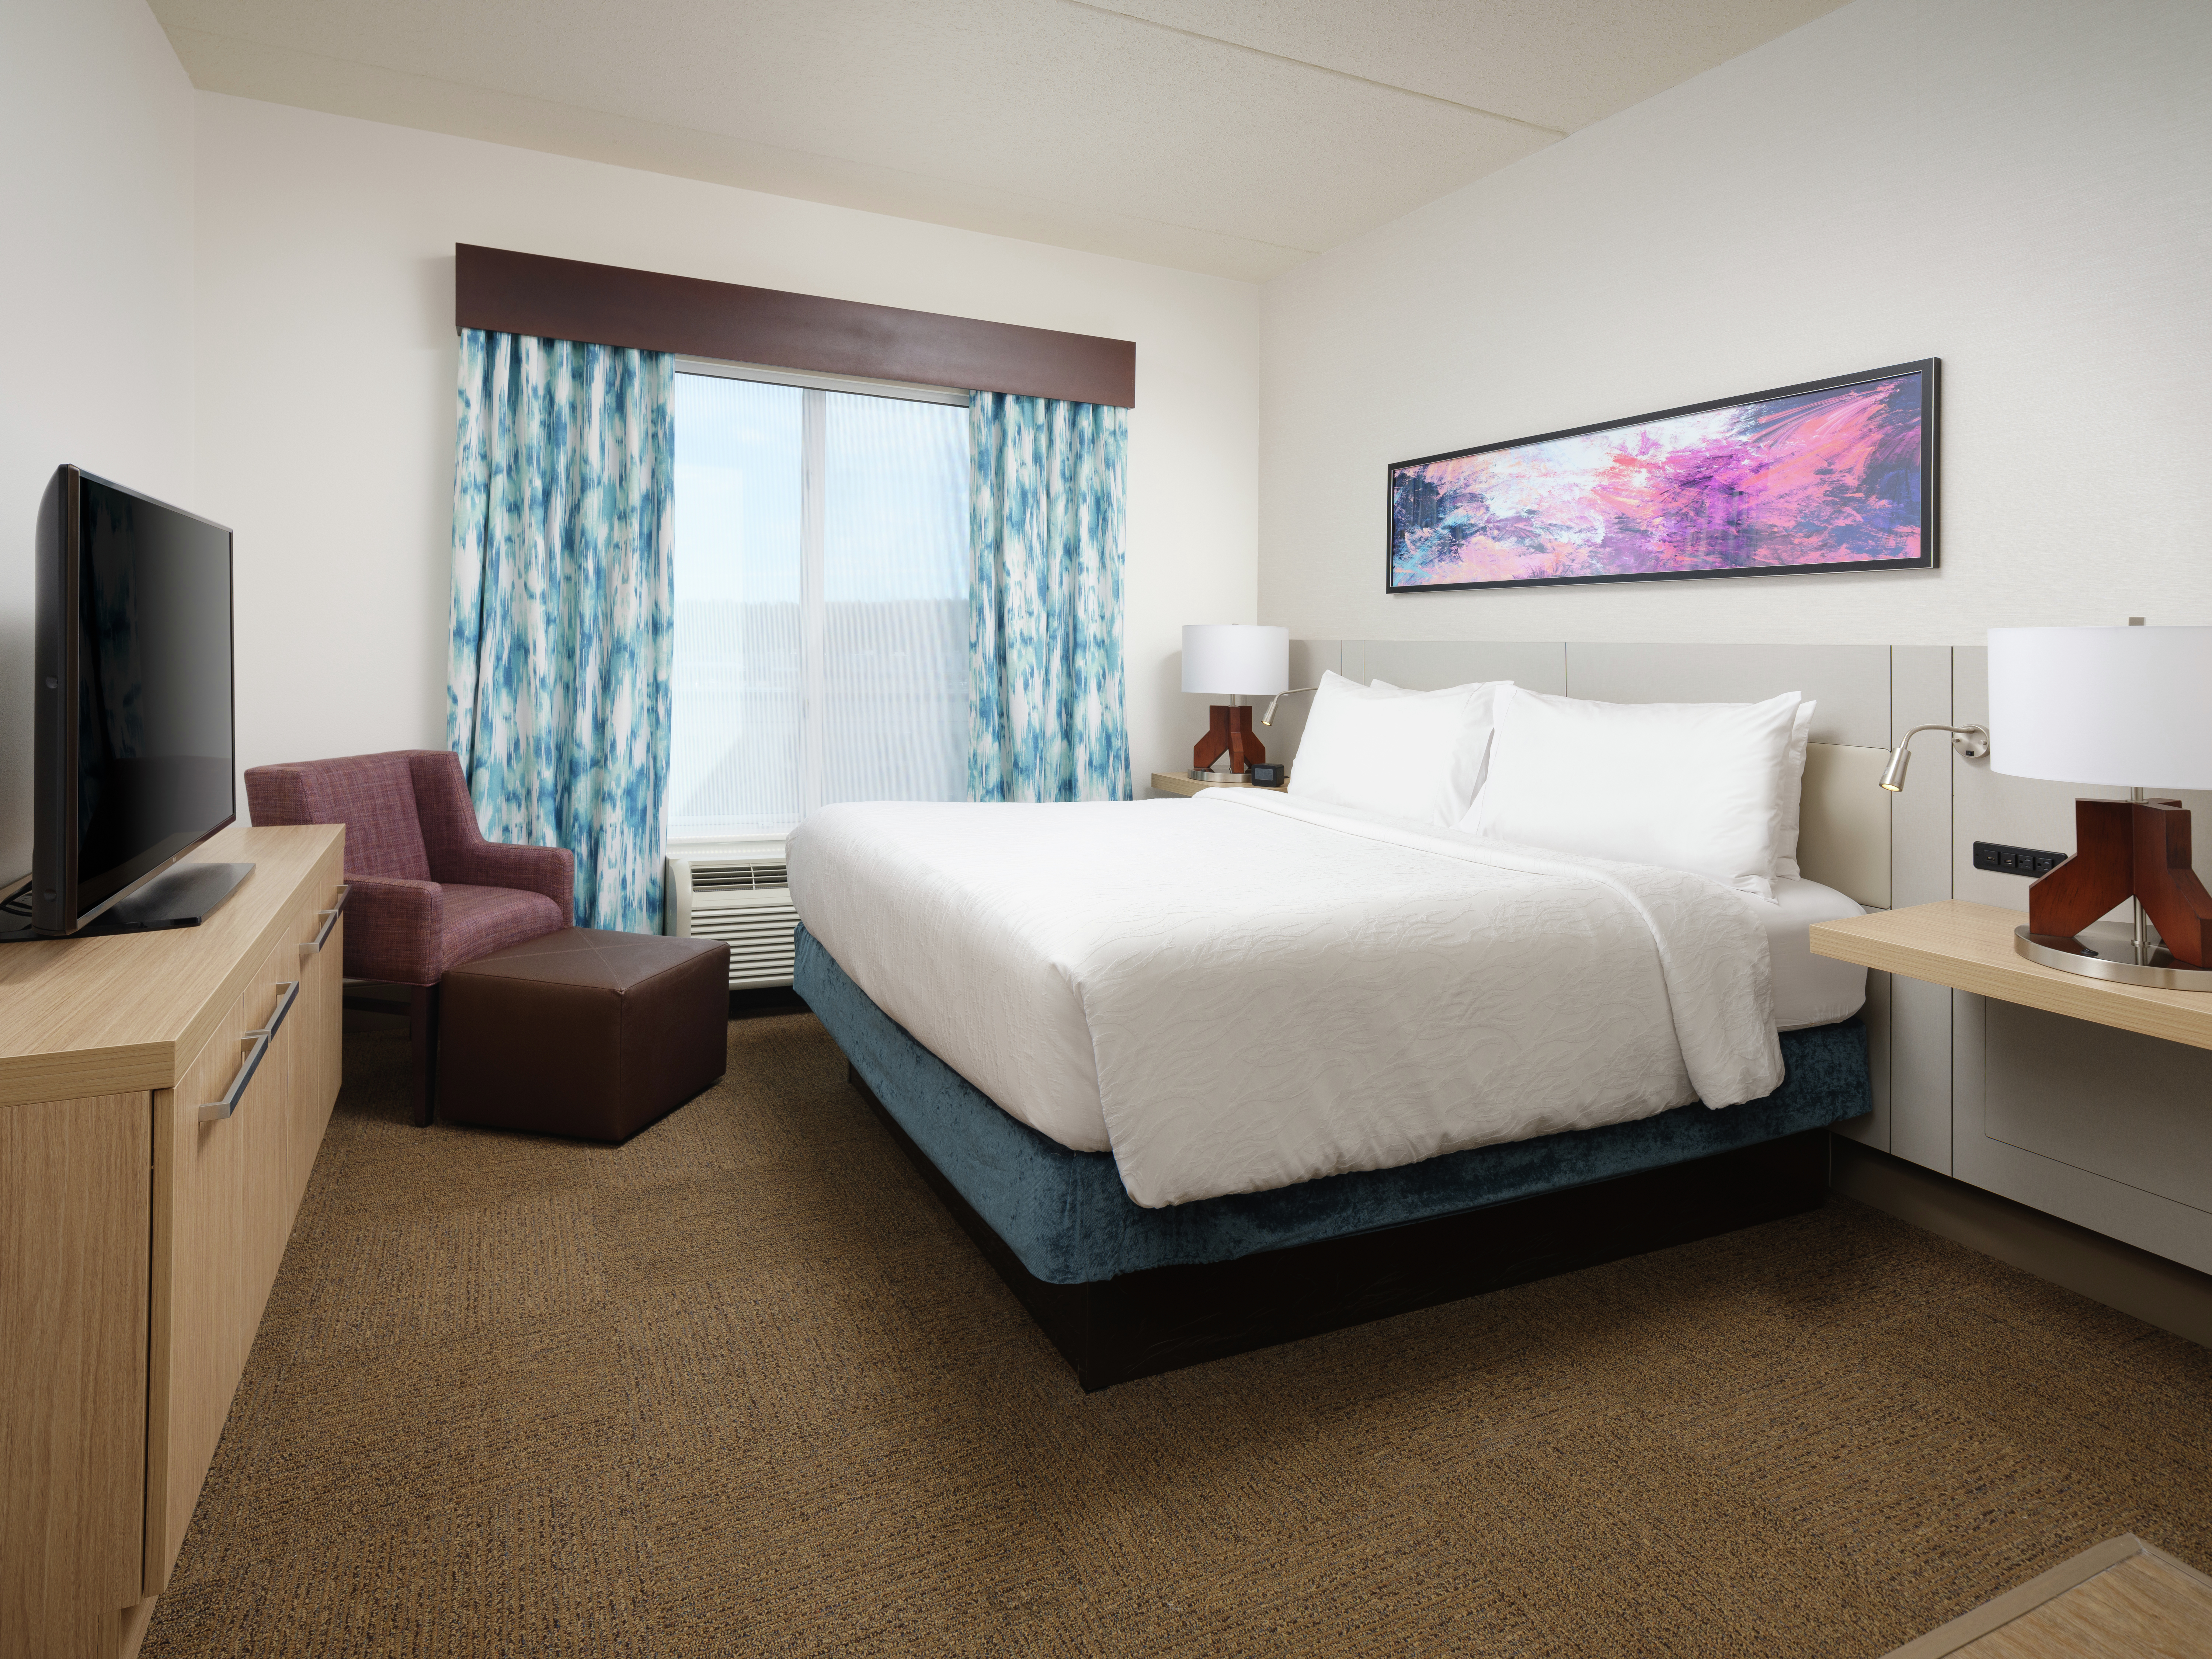 King Suite with Bed, Lounge Area, and Room Technology